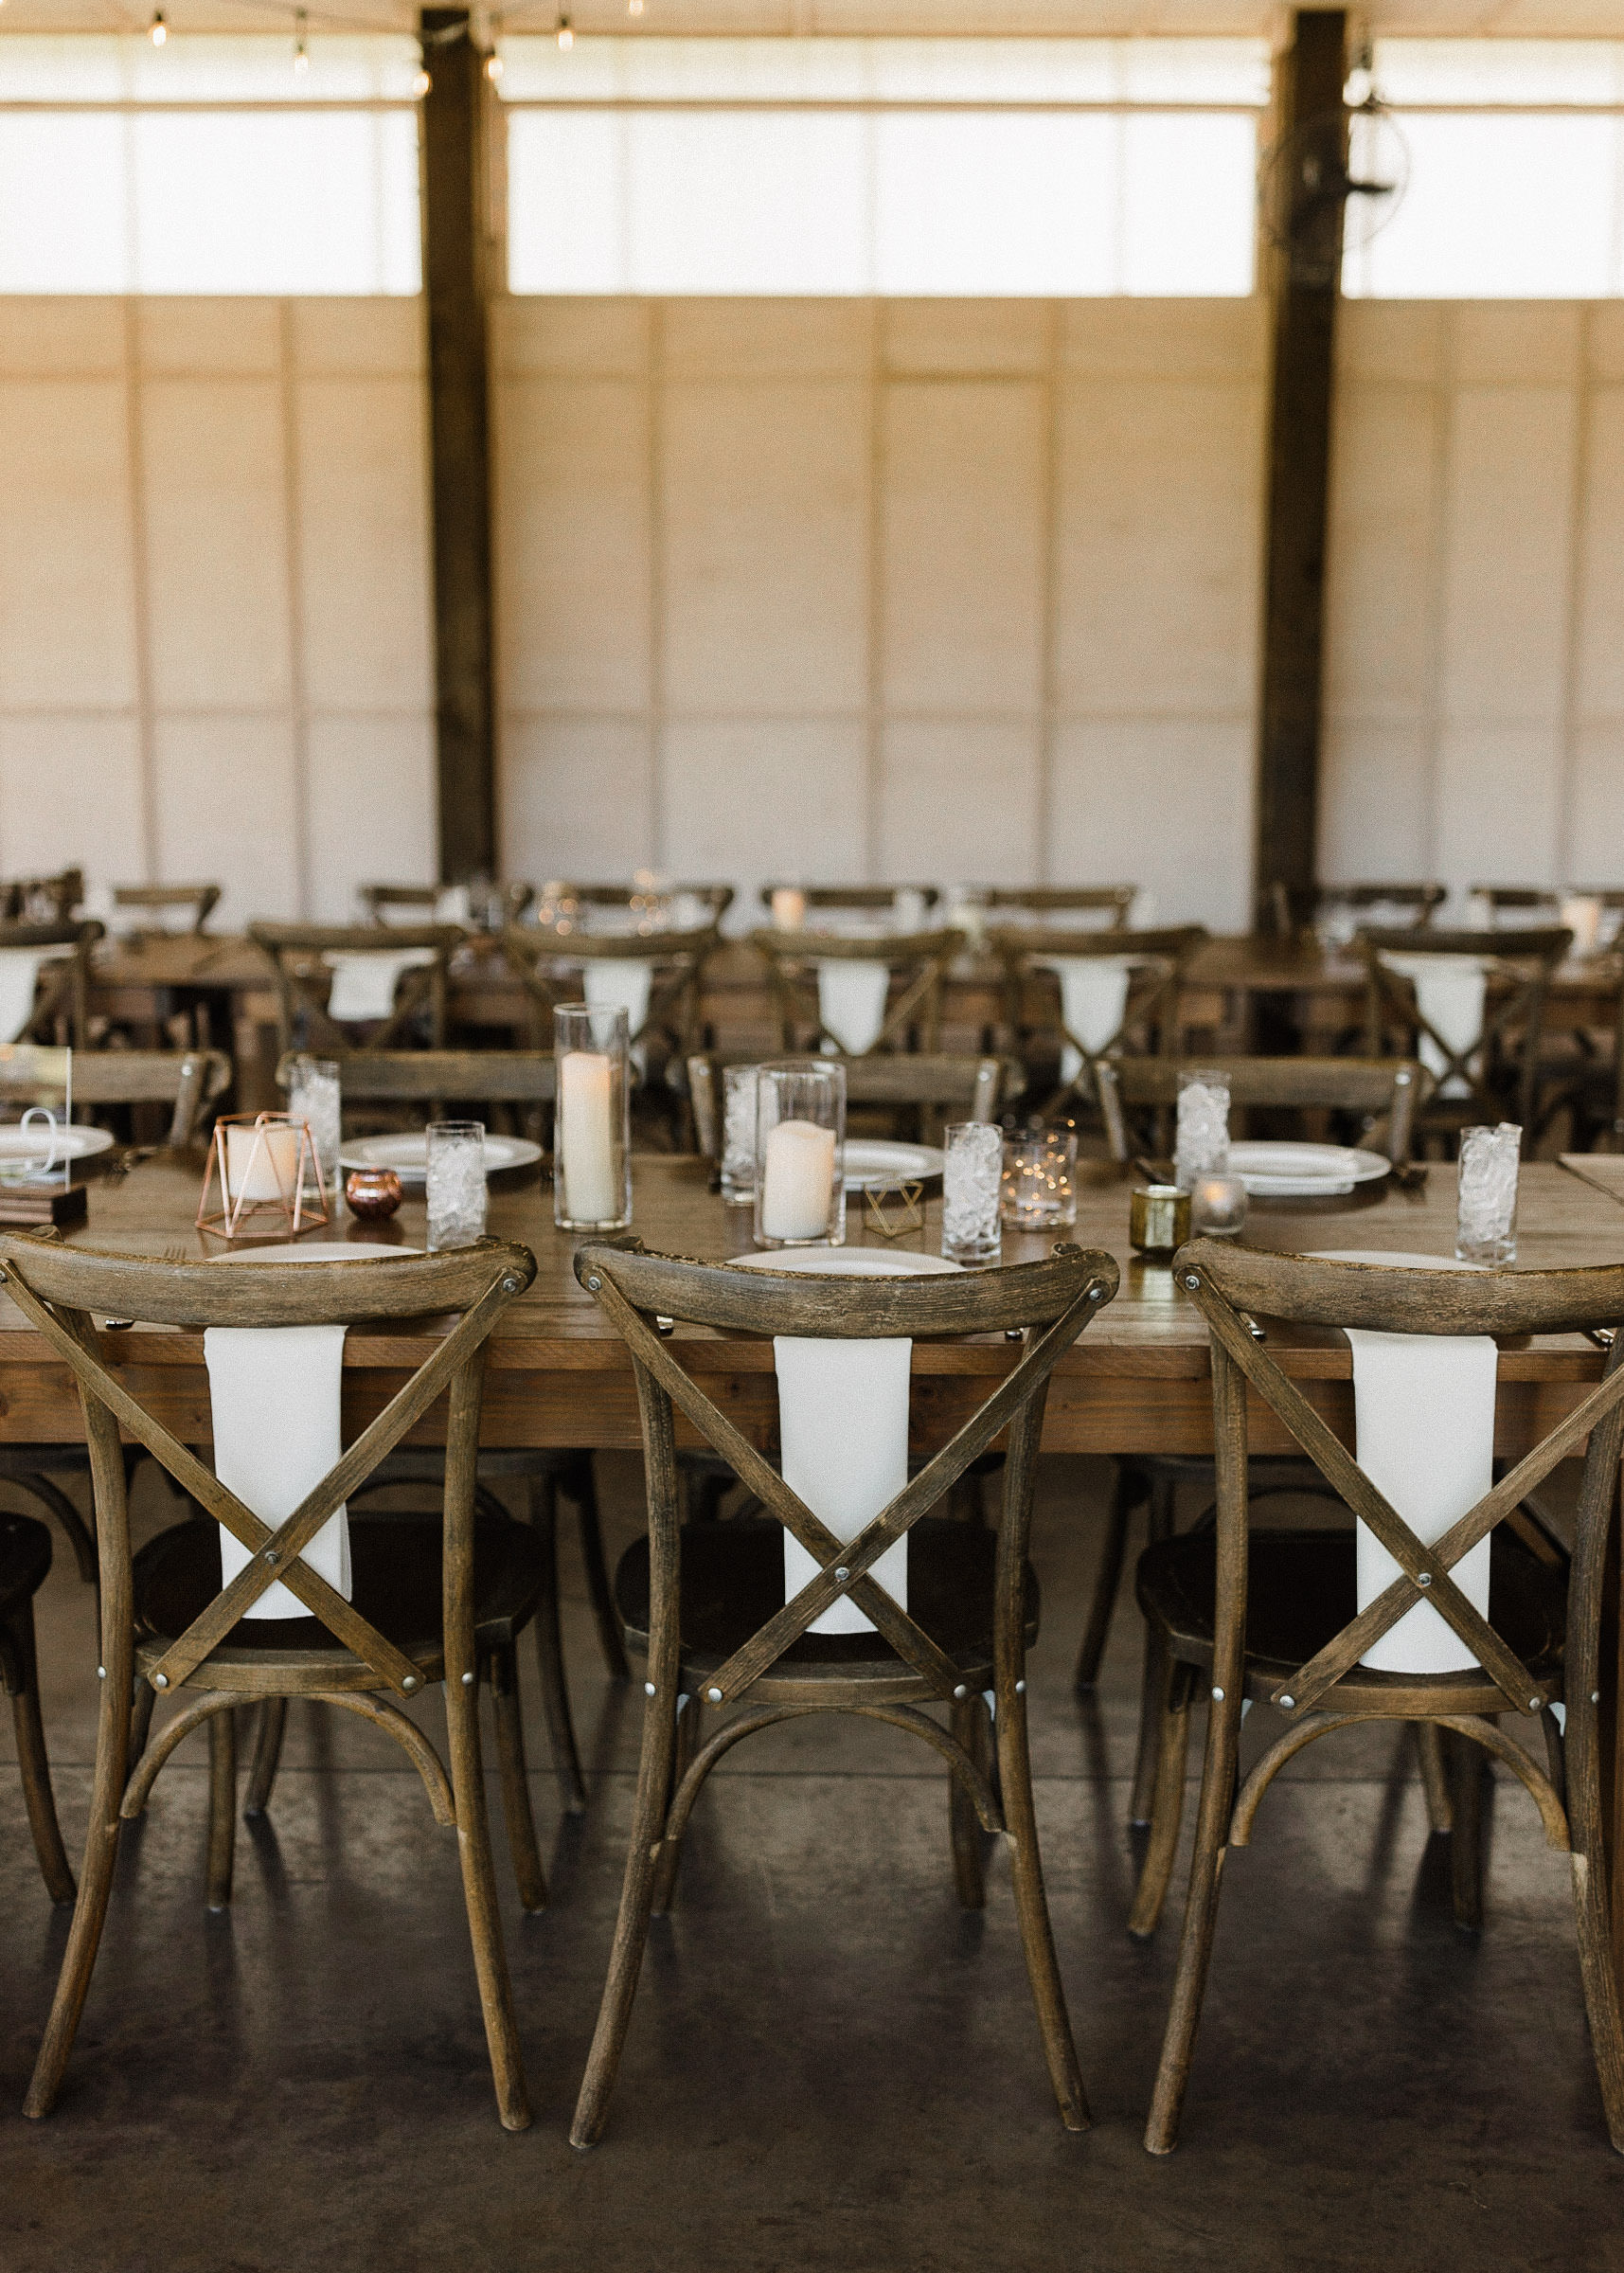 Chairs, tables, and place settings inside under semi-enclosed event space 